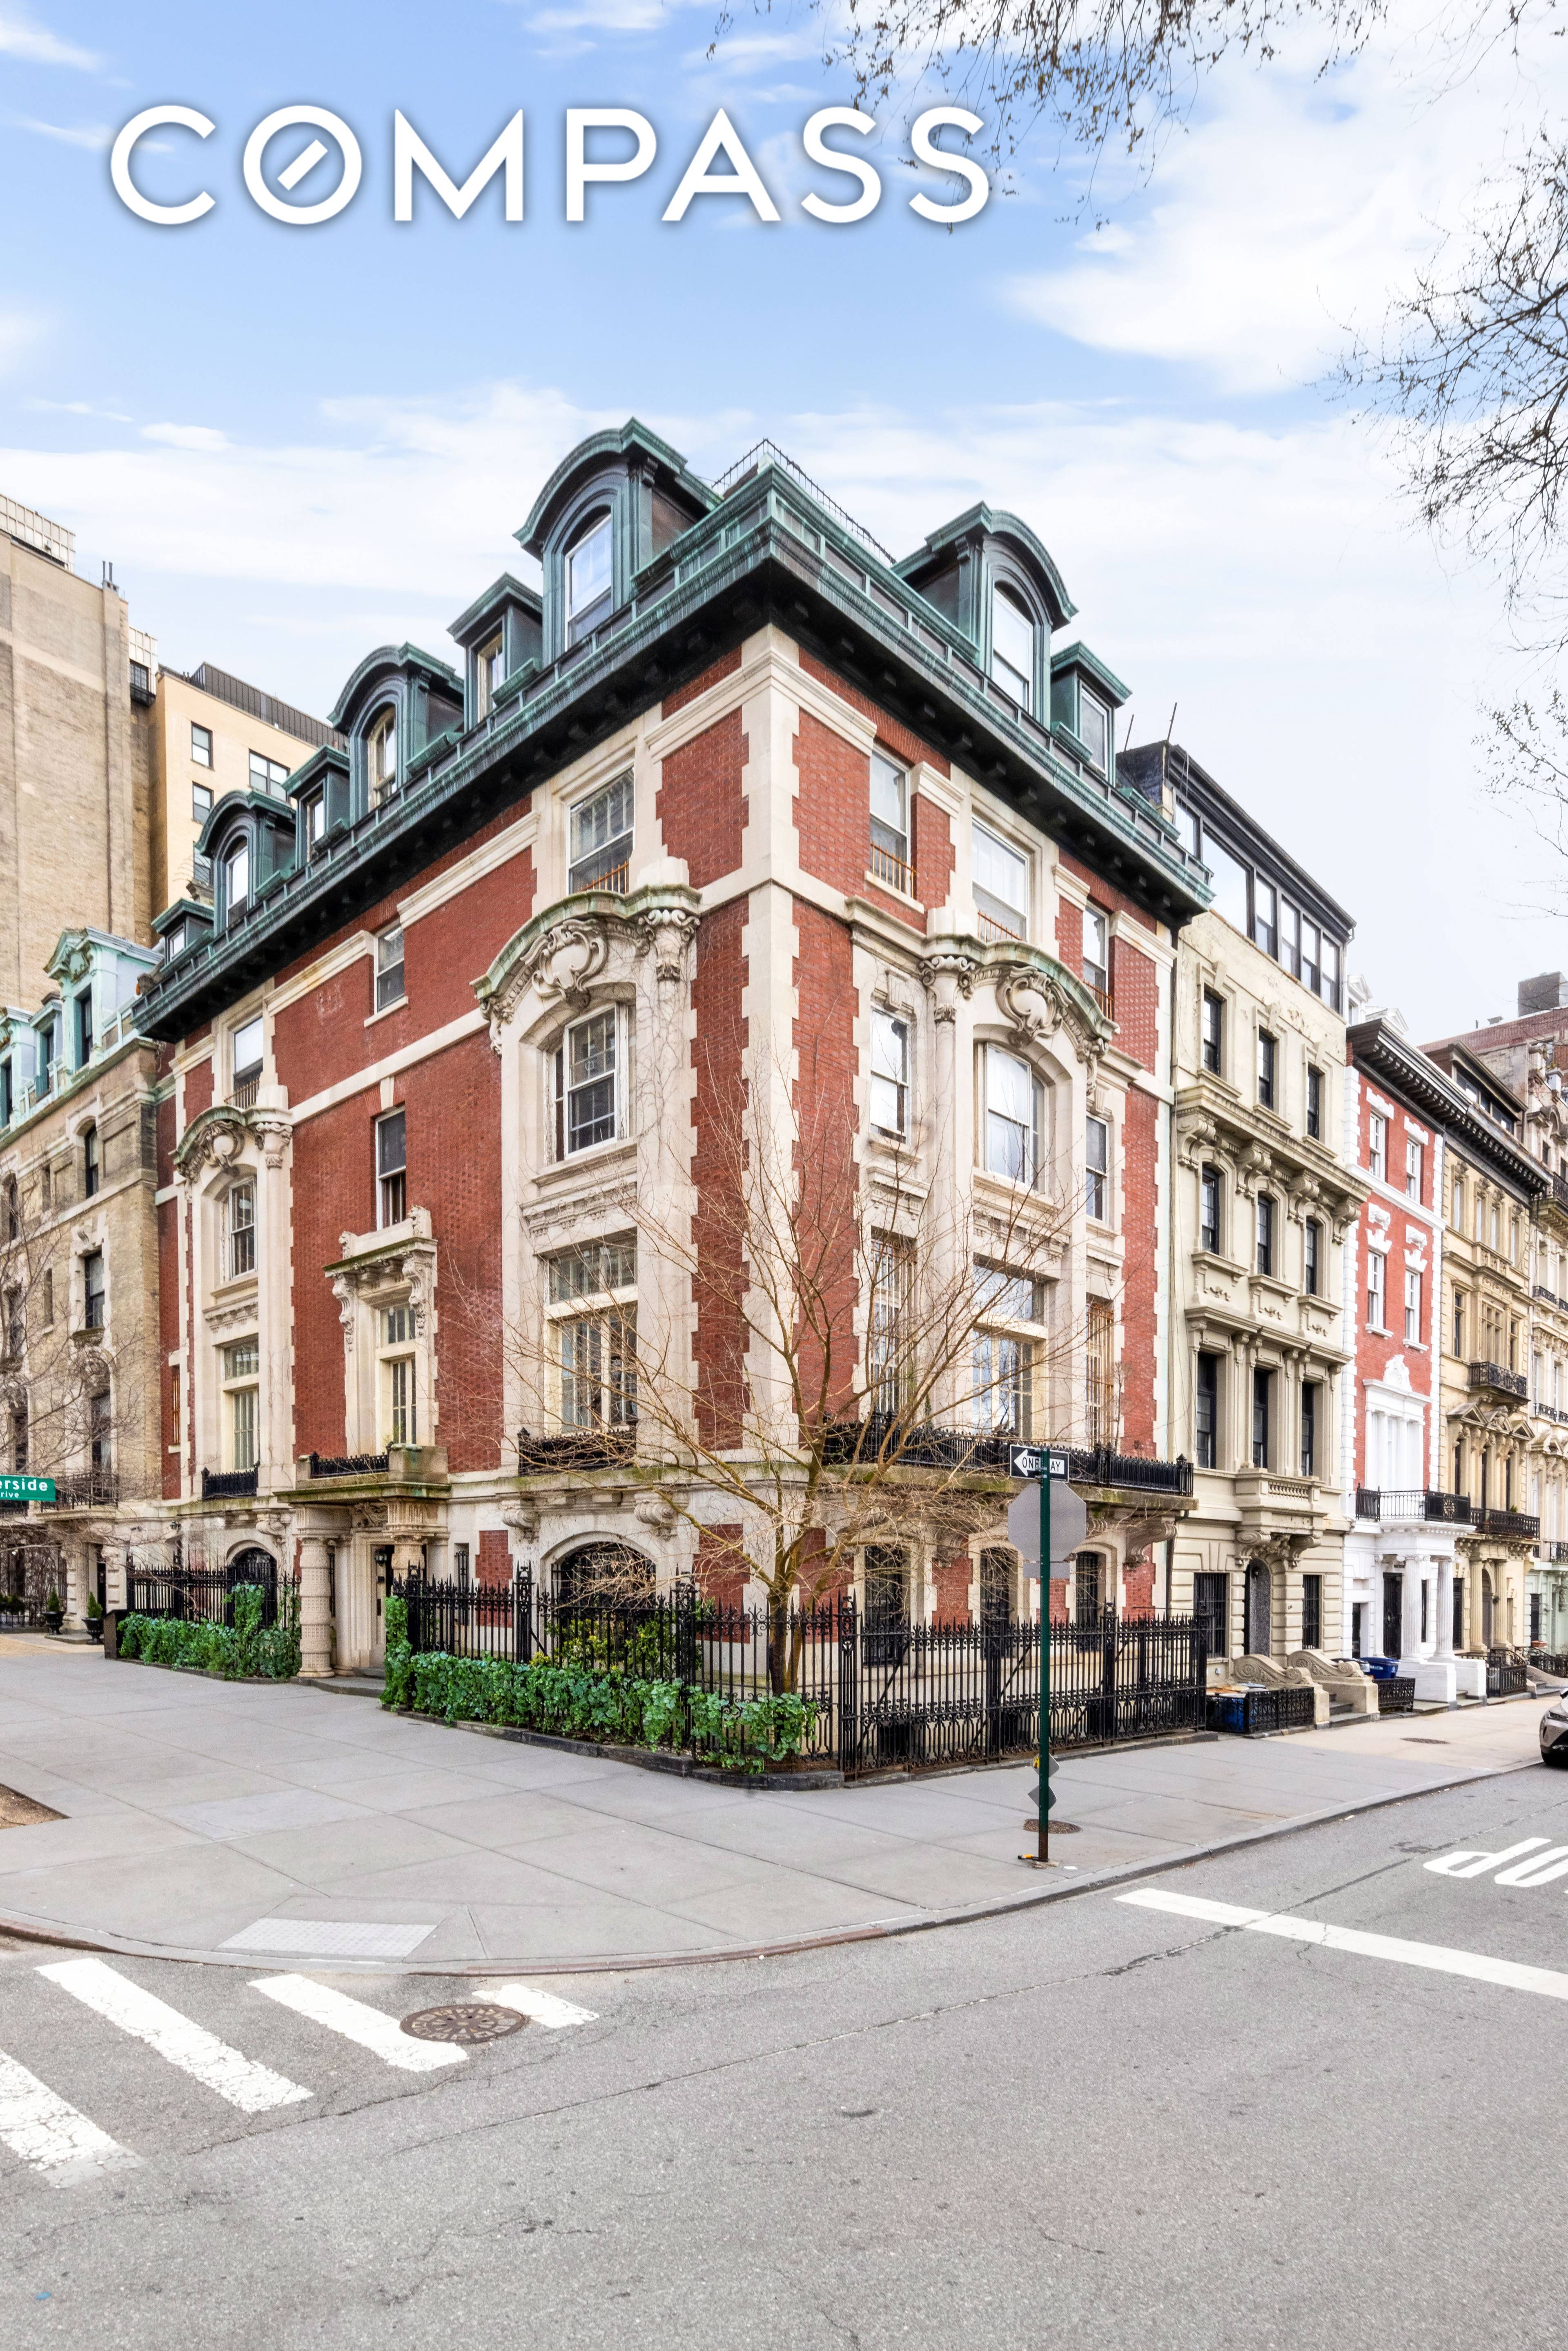 Presenting The River Mansion, an iconic home located at 337 Riverside Drive in the historic Riverside Drive West 105th Street District of the Upper West Side.